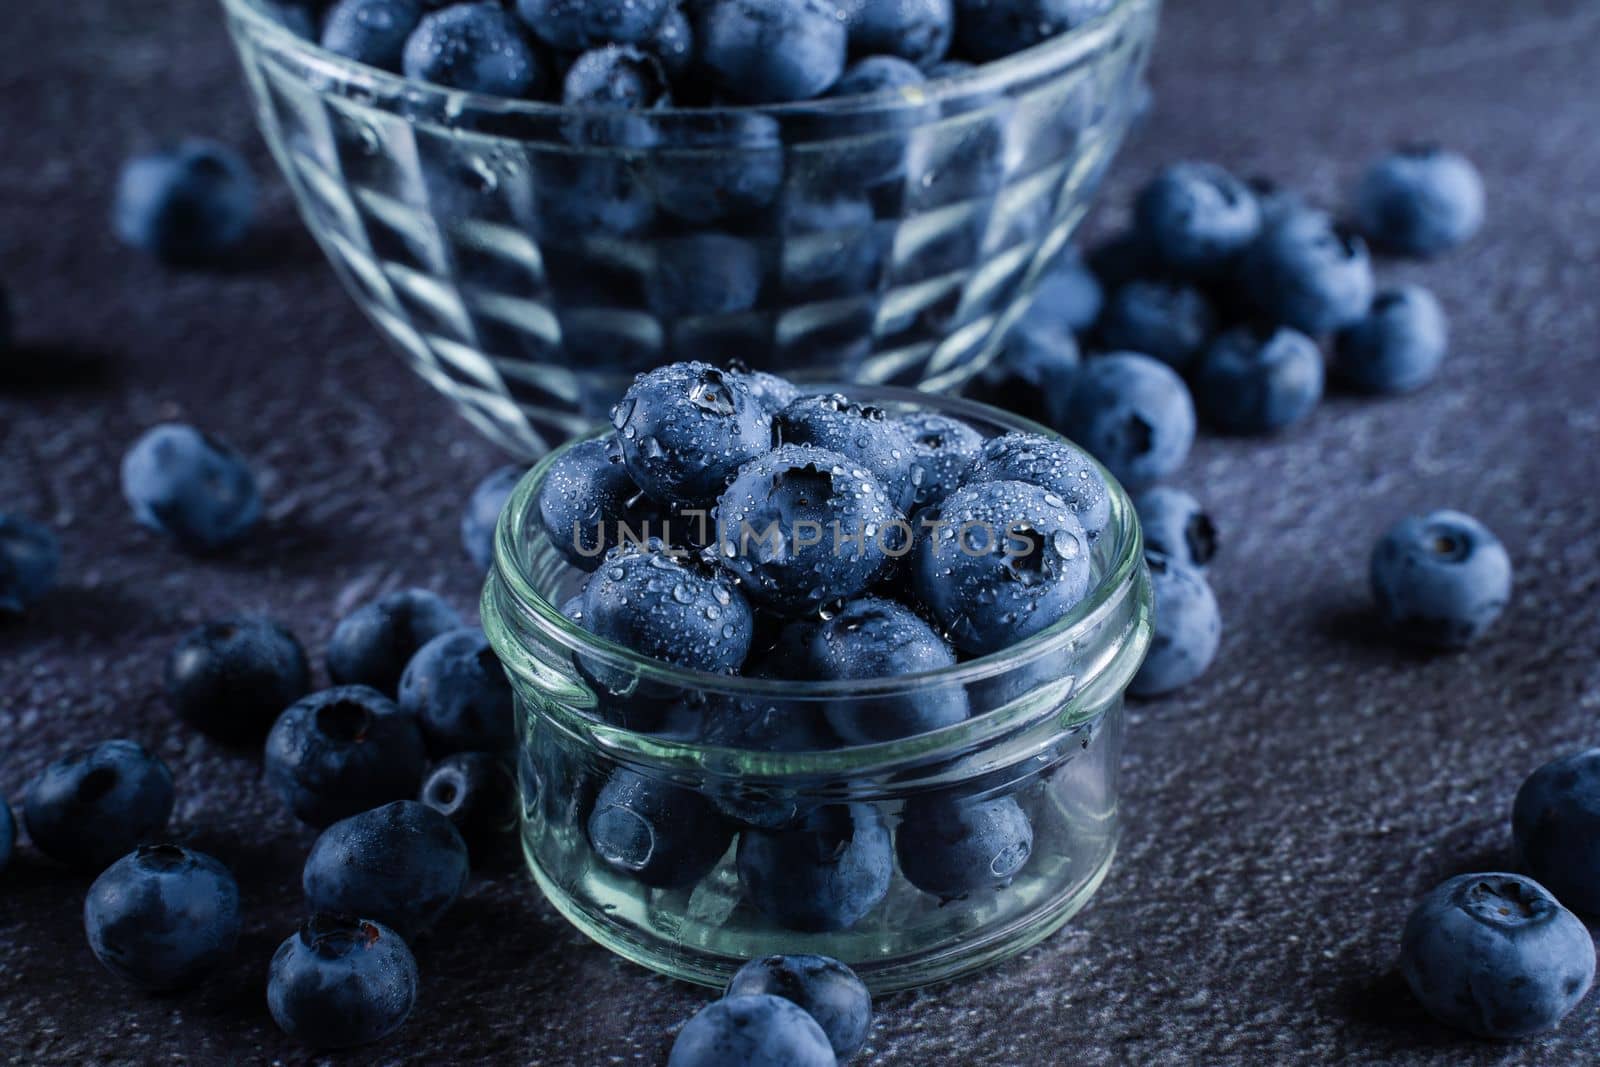 Blueberries organic natural berry with water drops on dark background close-up. Blueberry in glass bowl plate